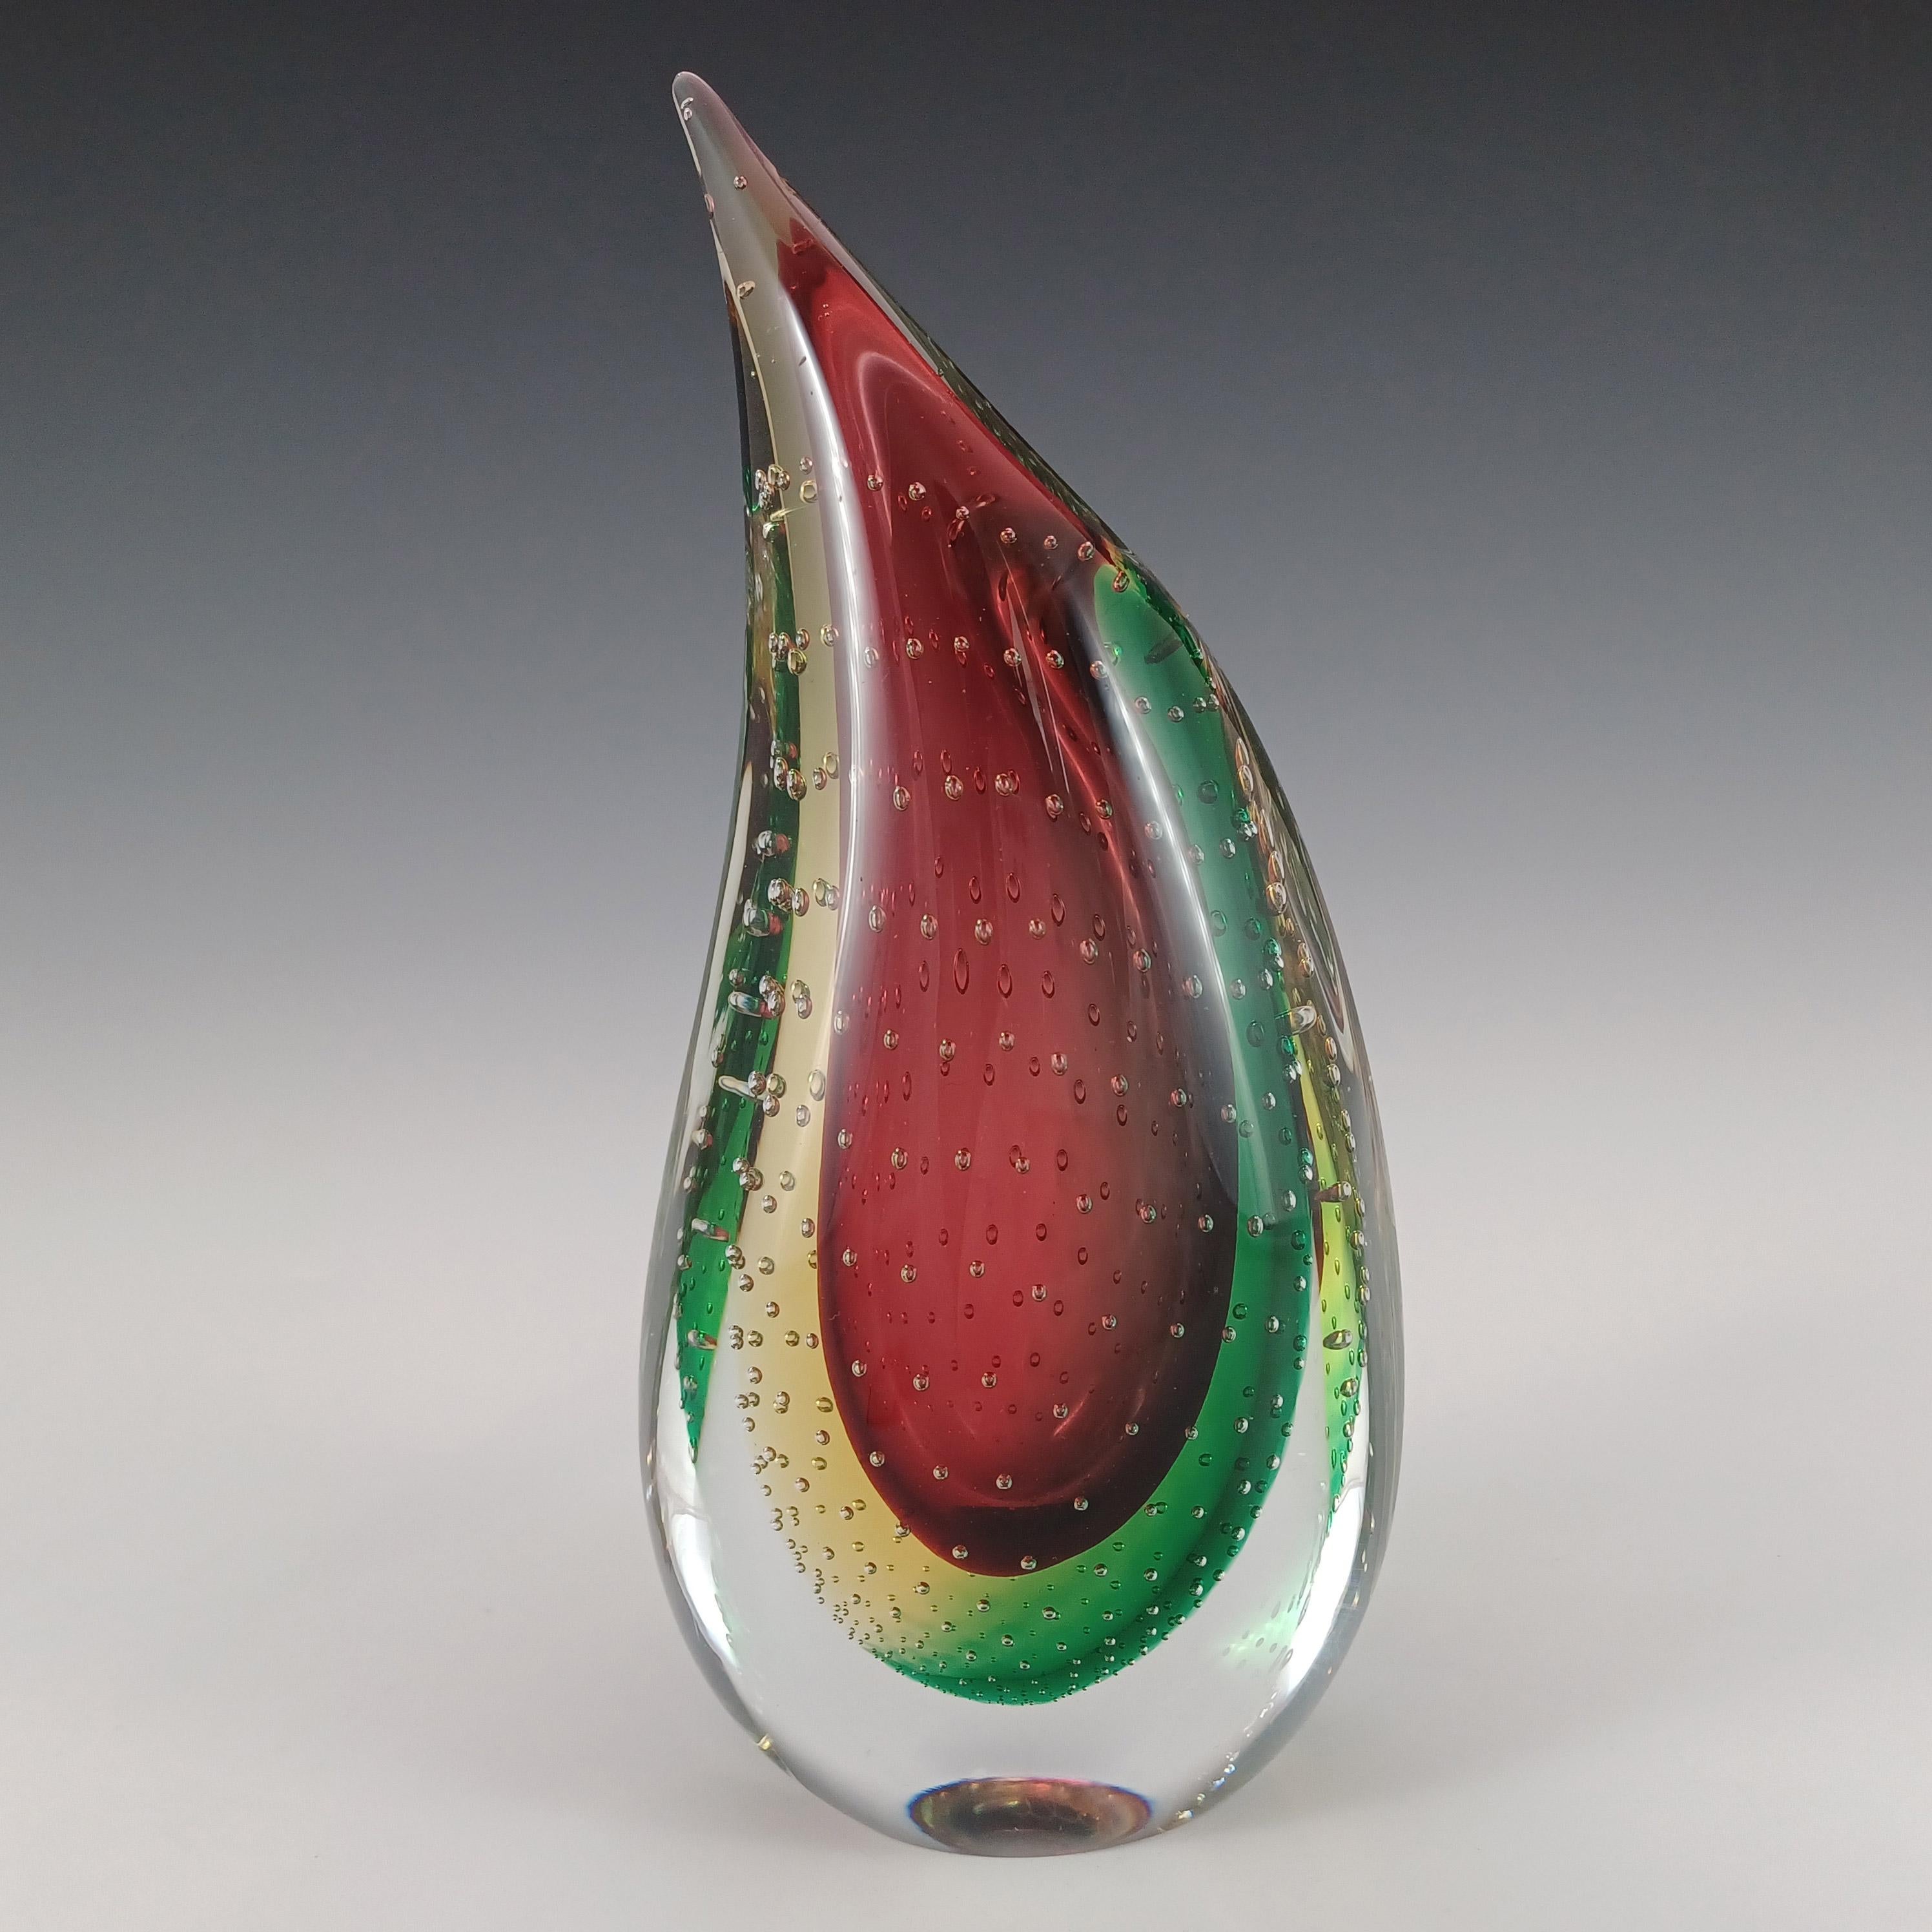 Here is a wonderful Venetian glass organic shaped vase. Made on the island of Murano, near Venice, Italy, by the Oball glassworks, signed to base Oball, Murano. In a stunning combination of cranberry red glass cased in green & yellow glass, which is